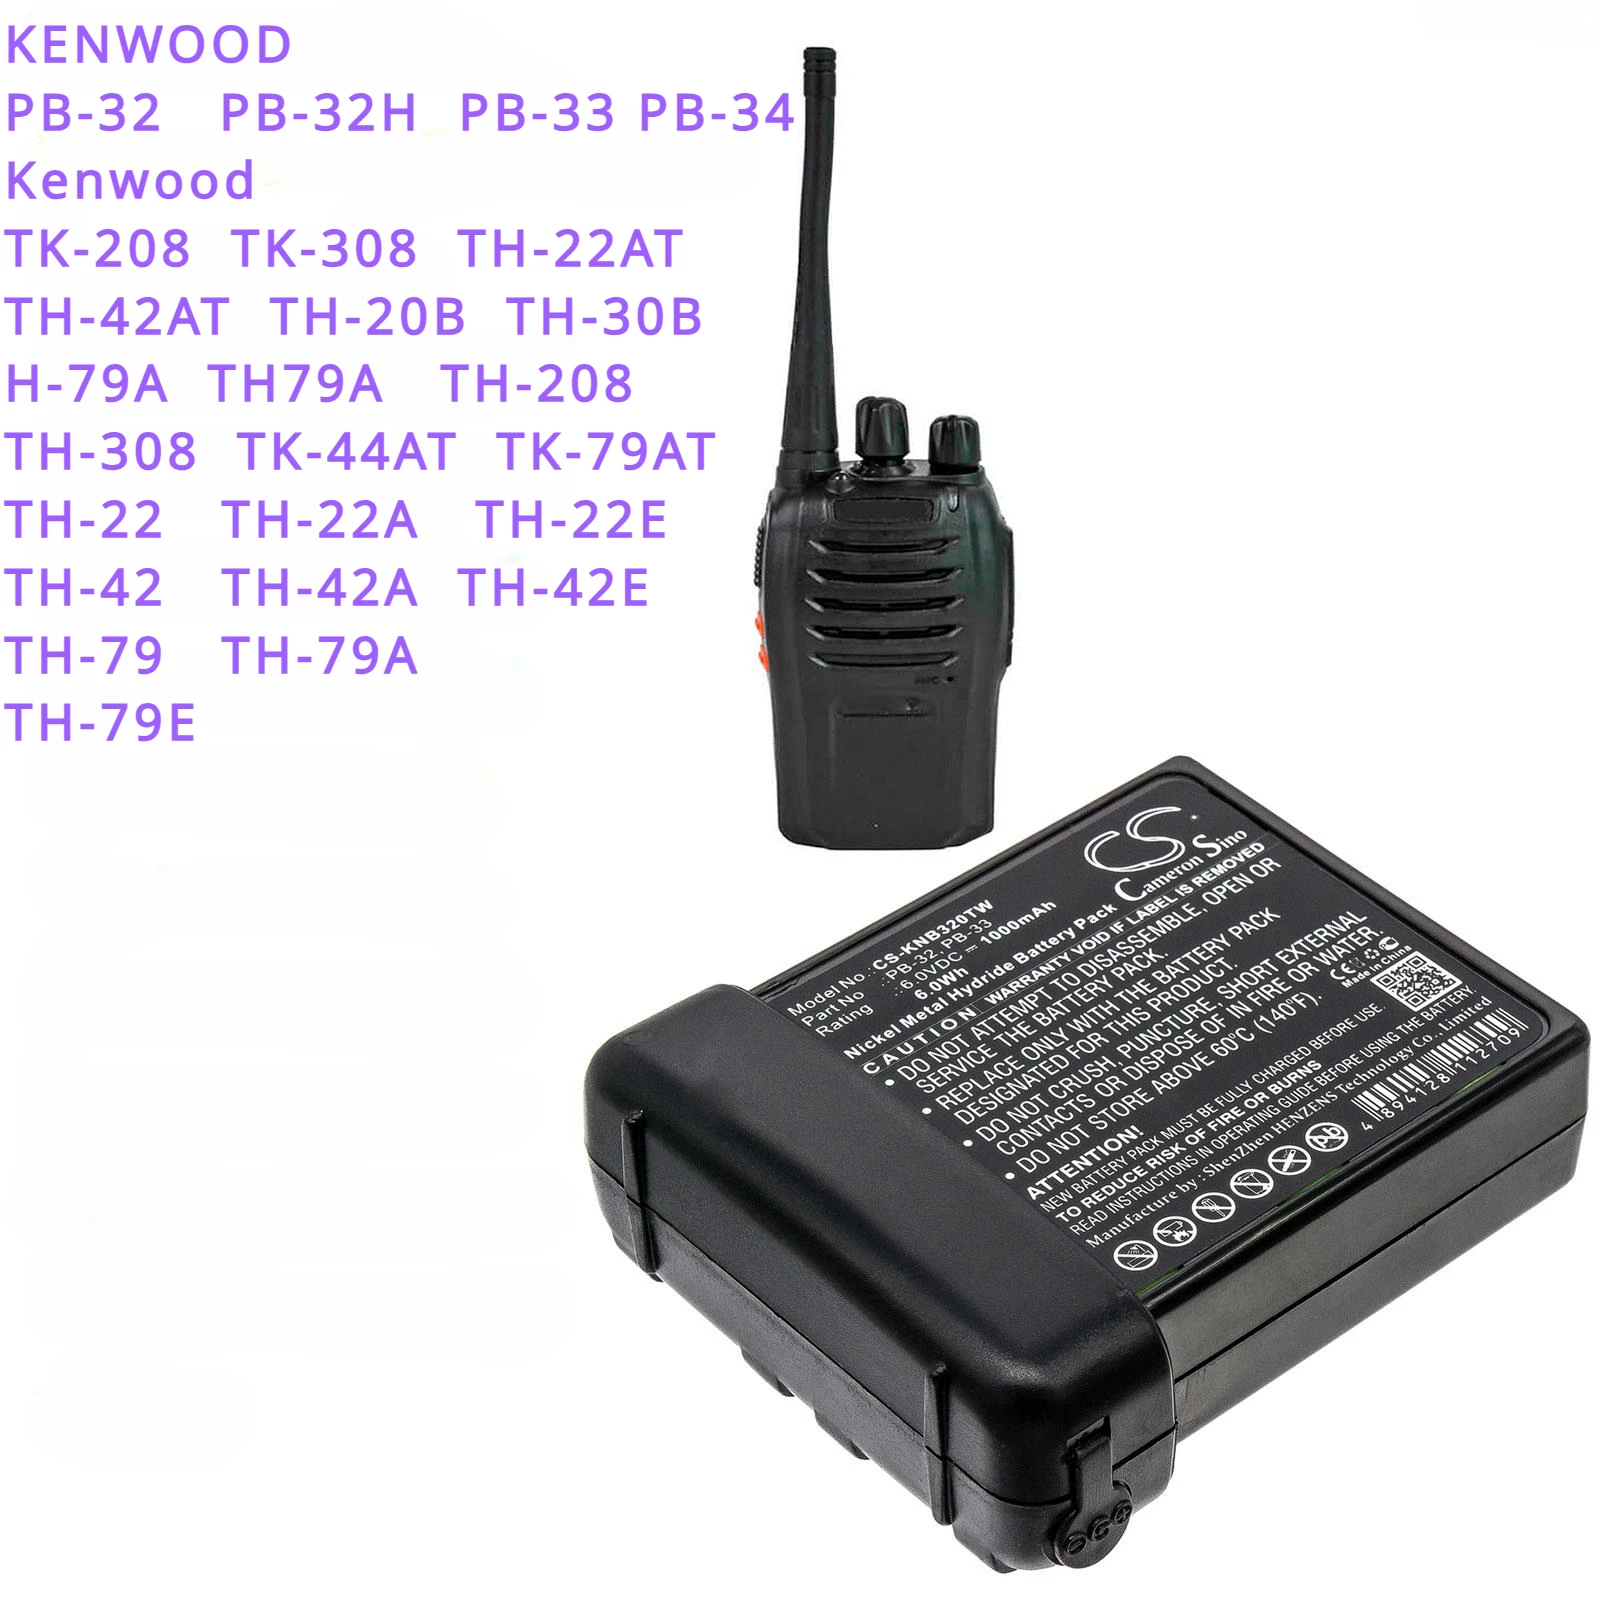 

1000mAh Two-Way Radio Battery for Kenwood TH-22, TH-22A,TH-22E,TH-42,TH-42A,TH-42E,TH-79,TH-79A,TH-79E,TH-22AT